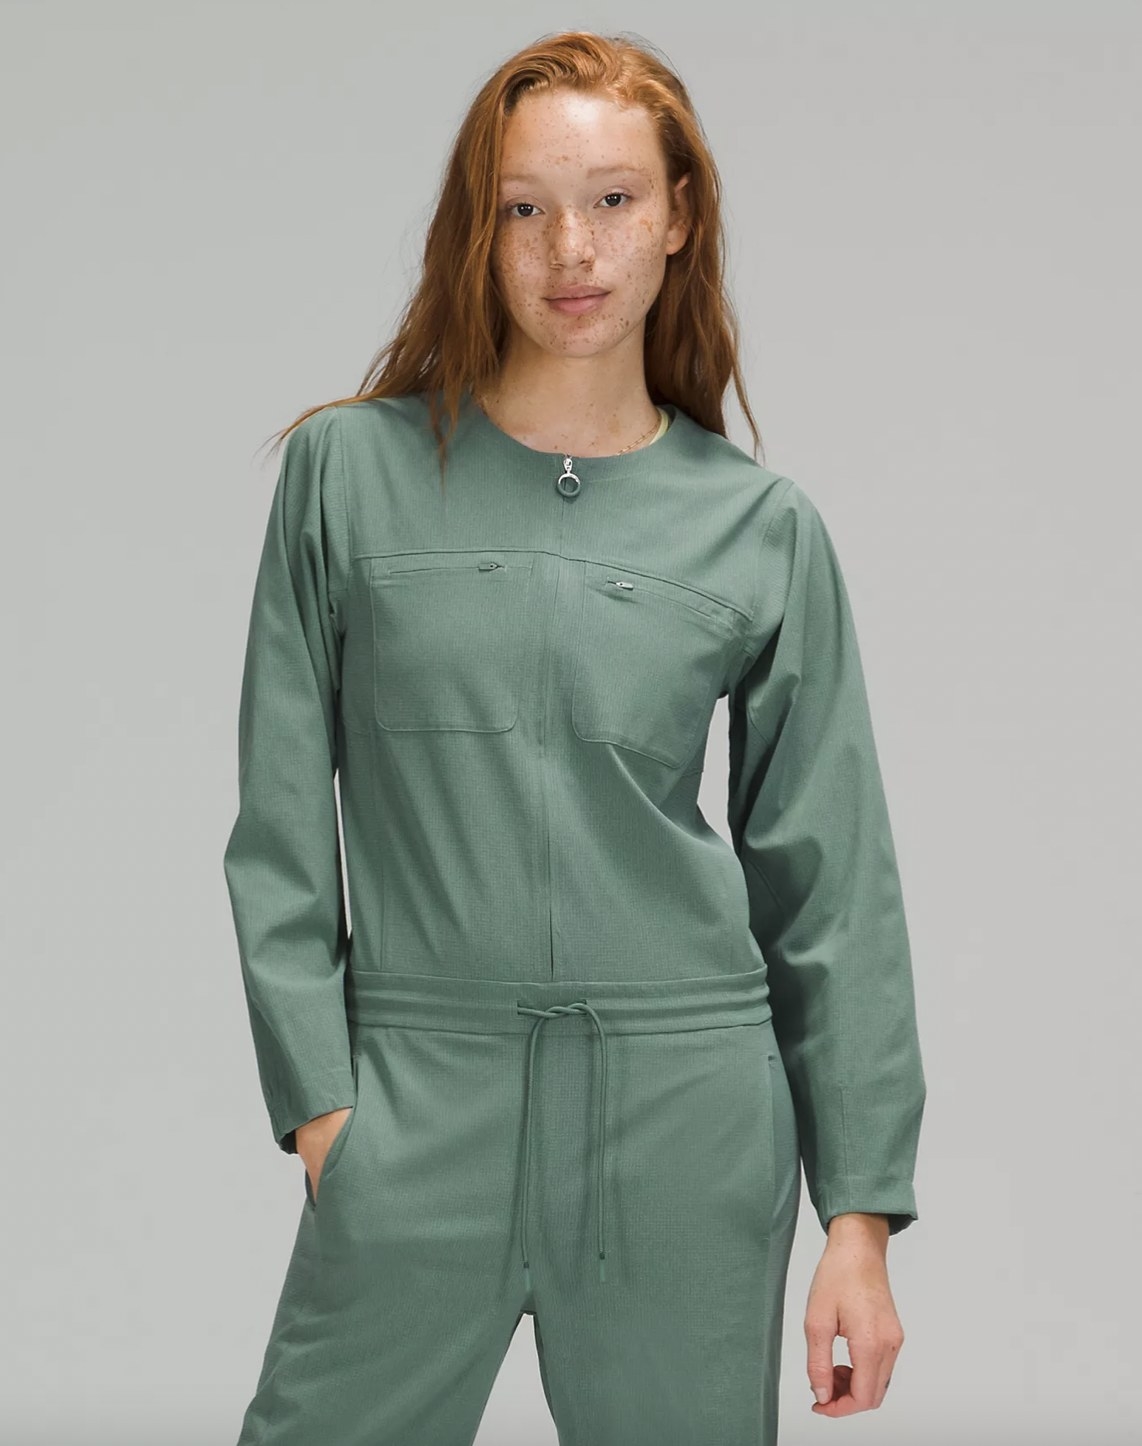 A woman wearing a green jumpsuit